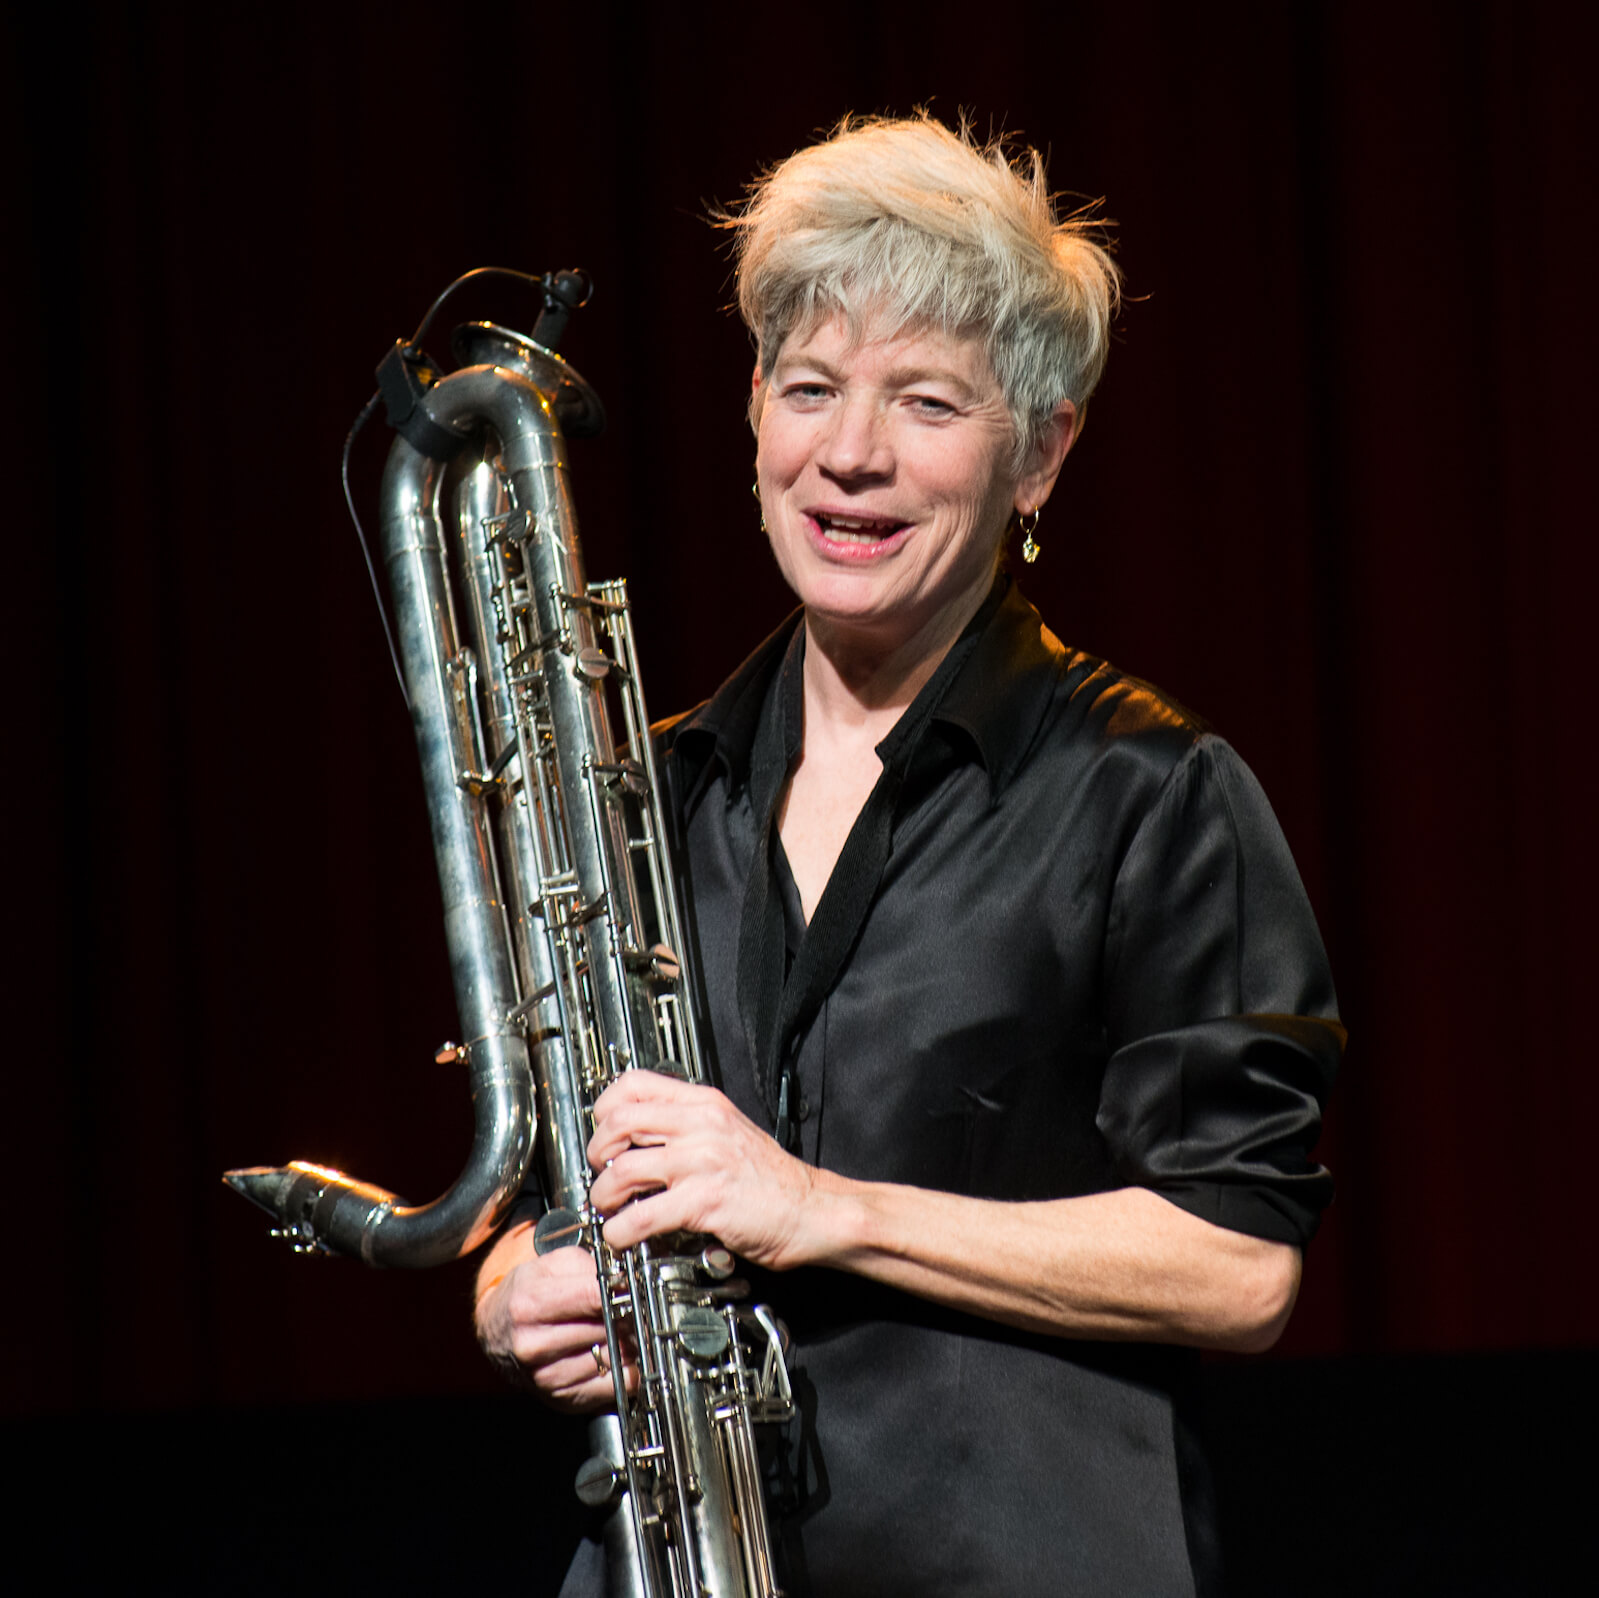 Lori Freedman in a shiny black shirt smiling while holding her clarinet.